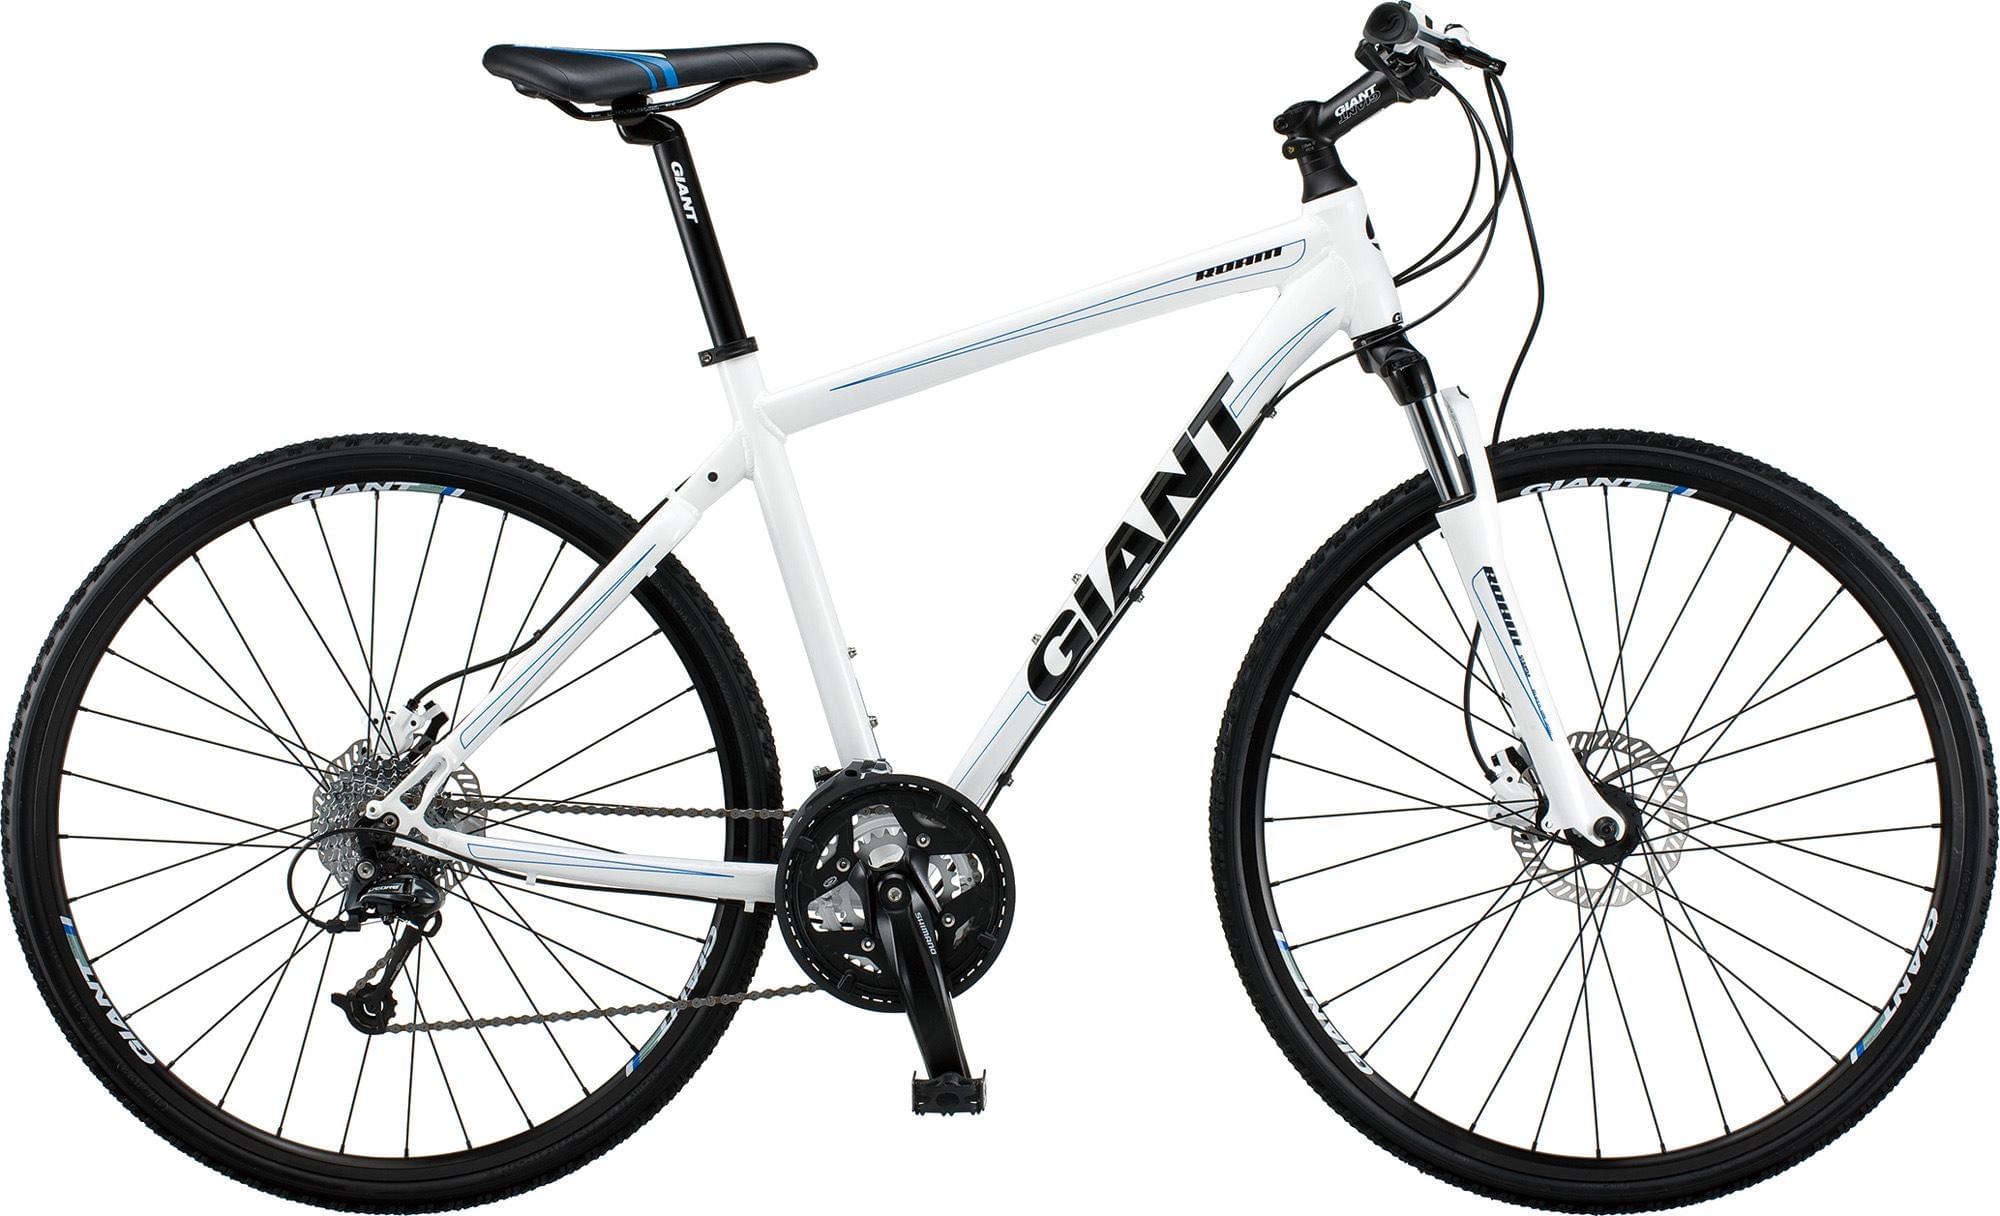 Cycle On Rent In Mumbai Book Online Rentals and Save 18%